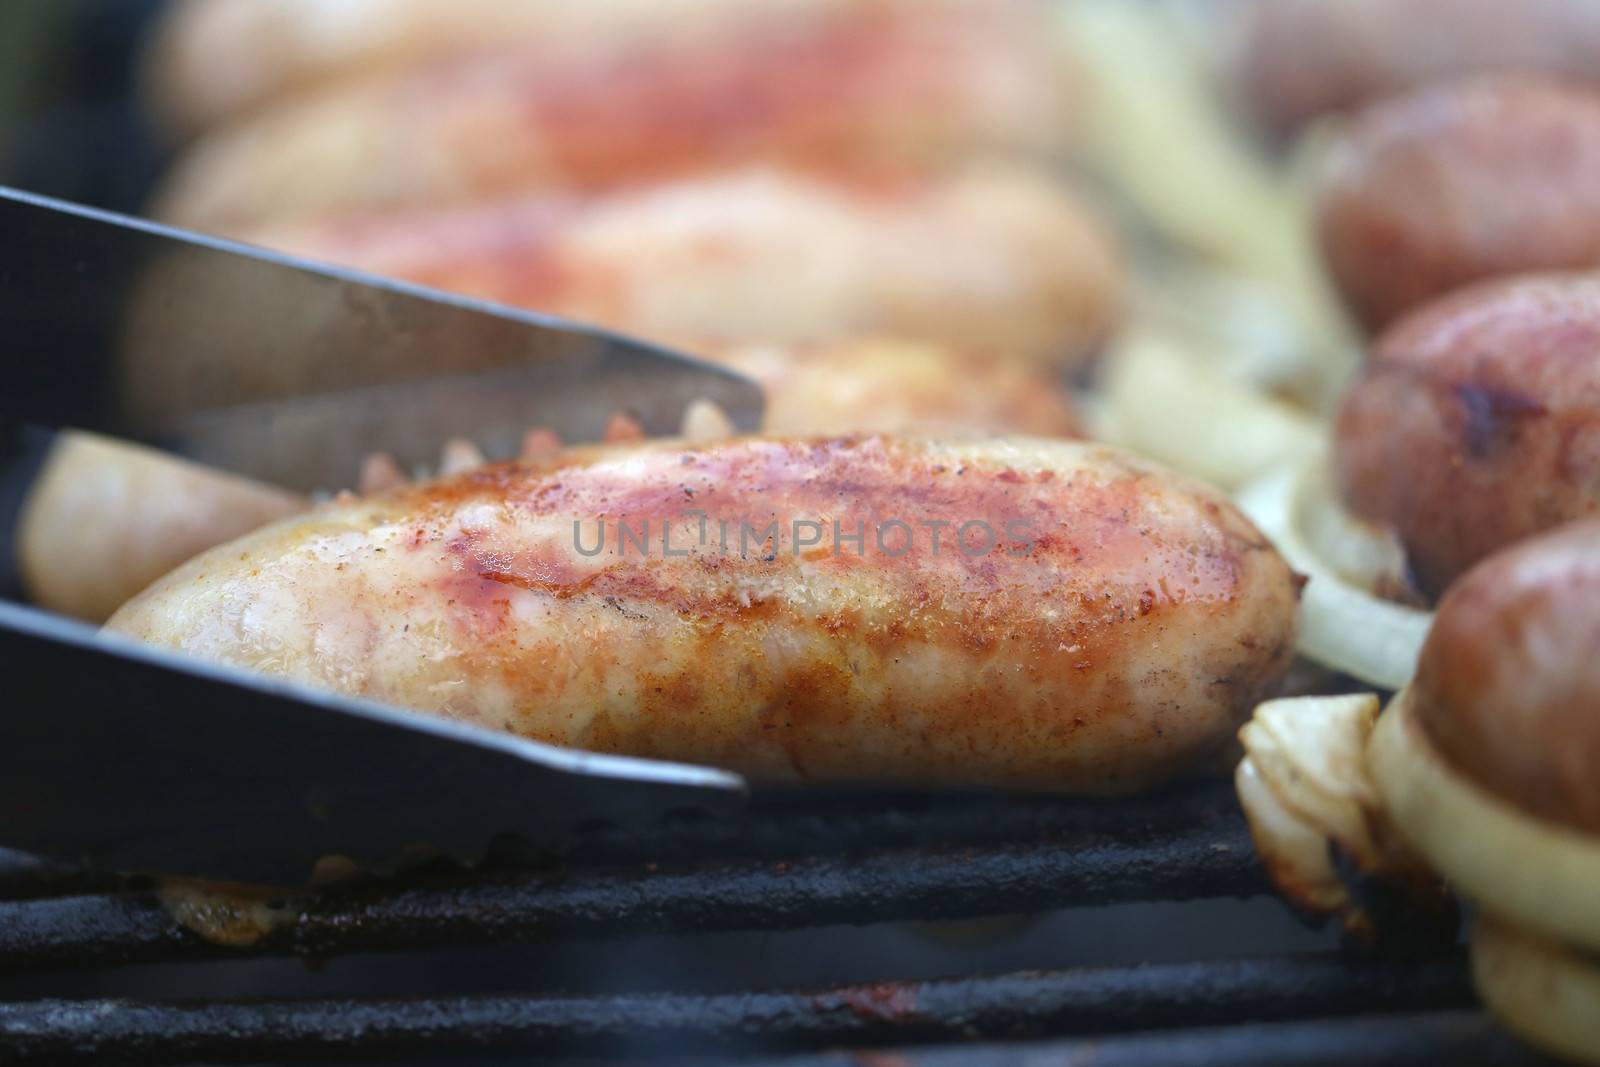 grilled sausage by indigolotos